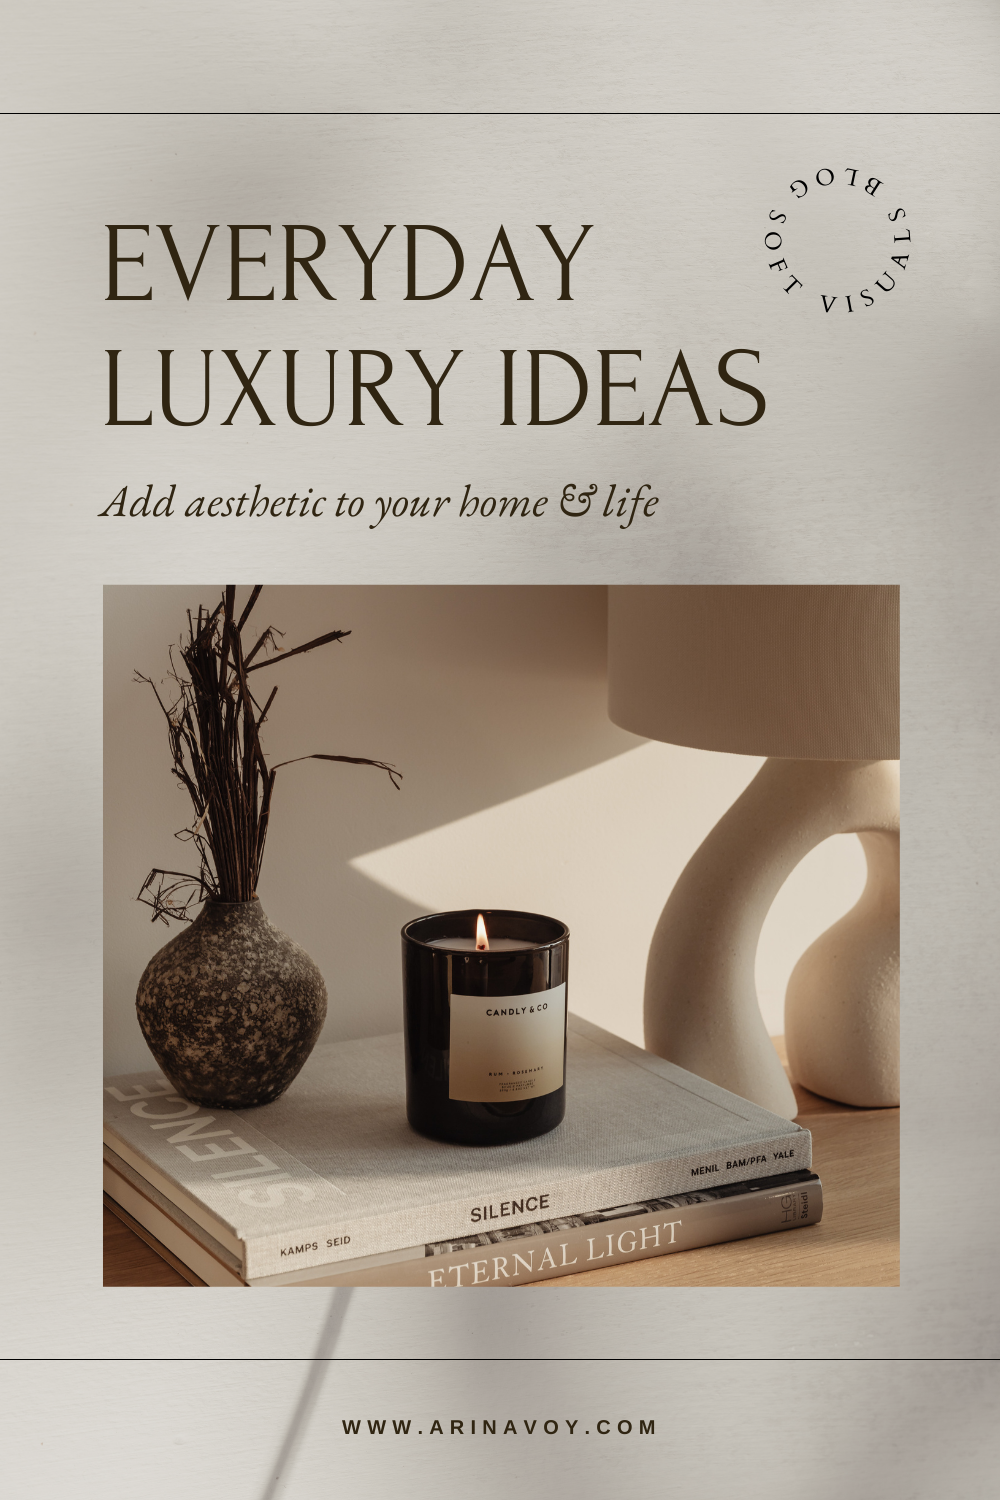 6 Things to Consider When Creating An Aesthetic - Daily Dose of Luxury